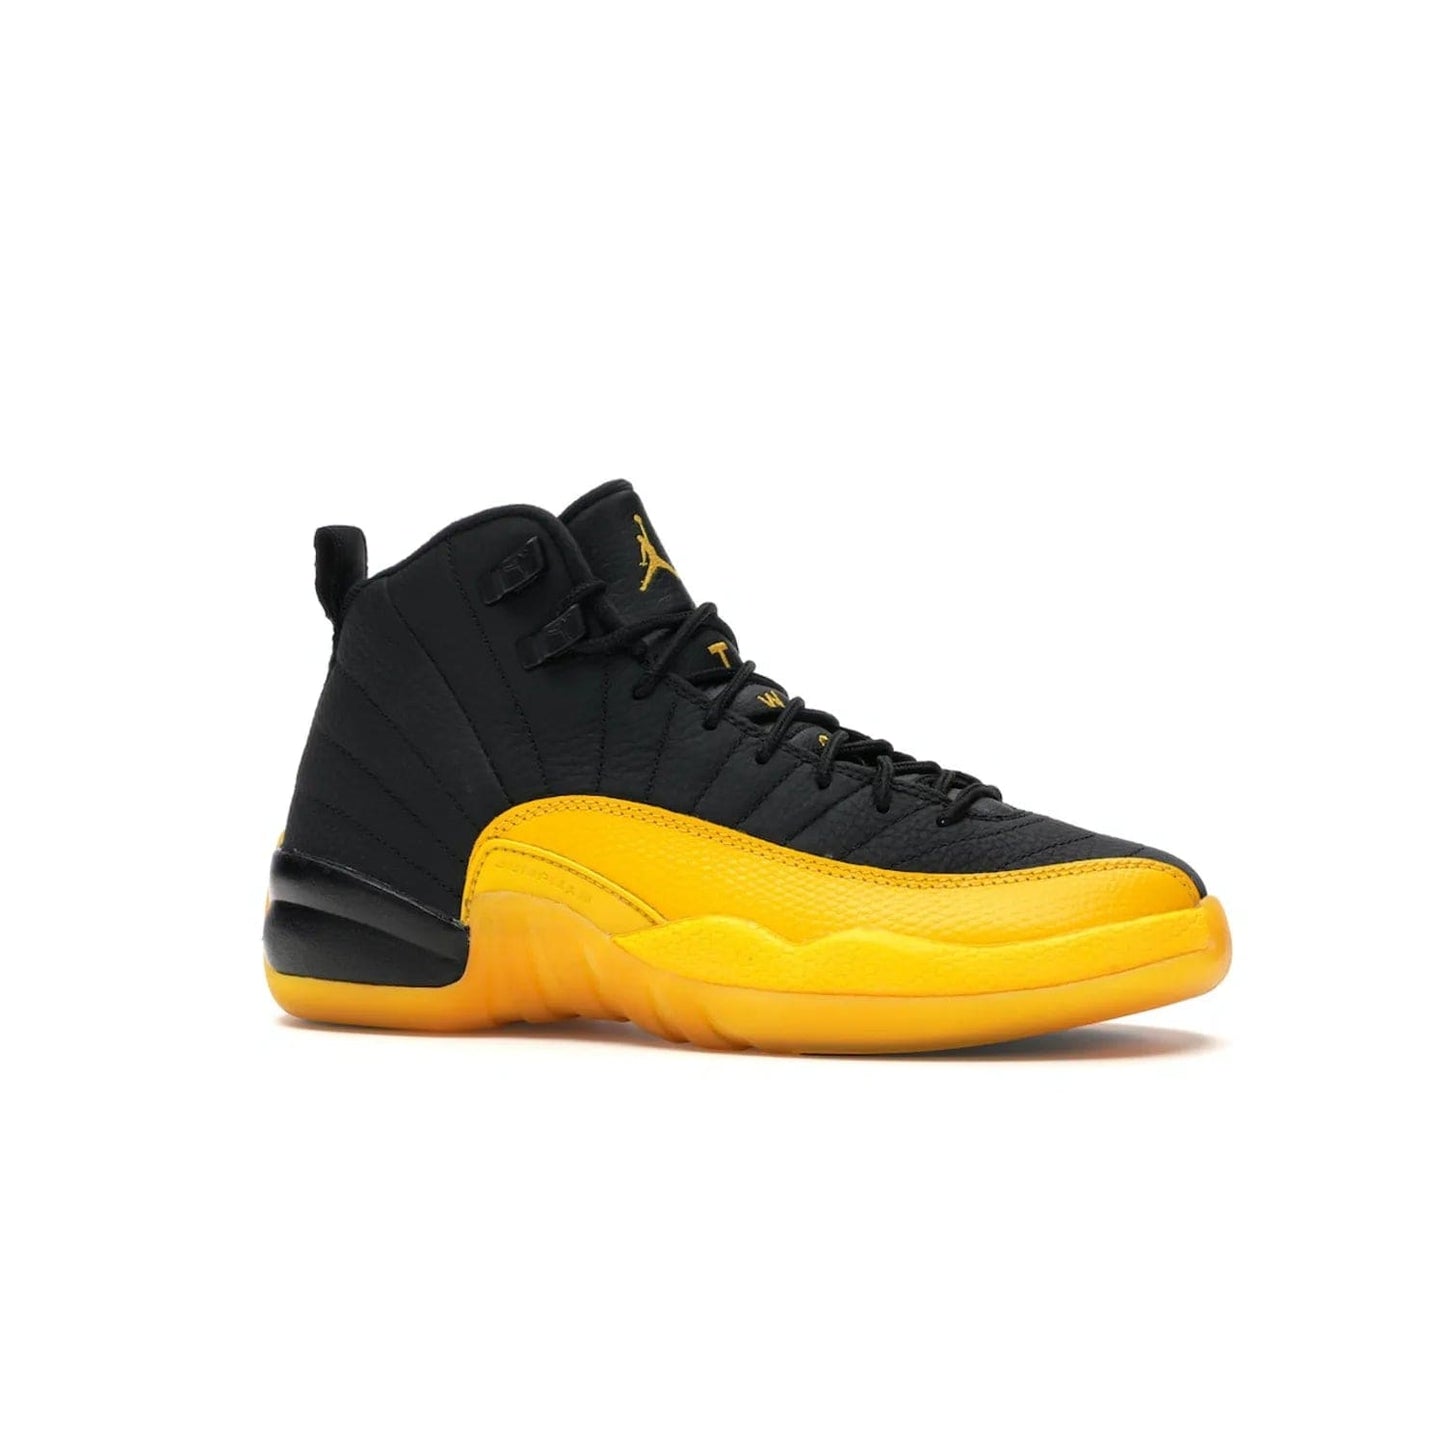 Jordan 12 Retro Black University Gold (GS) - Image 3 - Only at www.BallersClubKickz.com - Upgrade your kid's shoe collection with the Jordan 12 Retro Black University Gold. With classic style, black tumbled leather upper, and University Gold accents, it's a great summer look. Out July 2020.